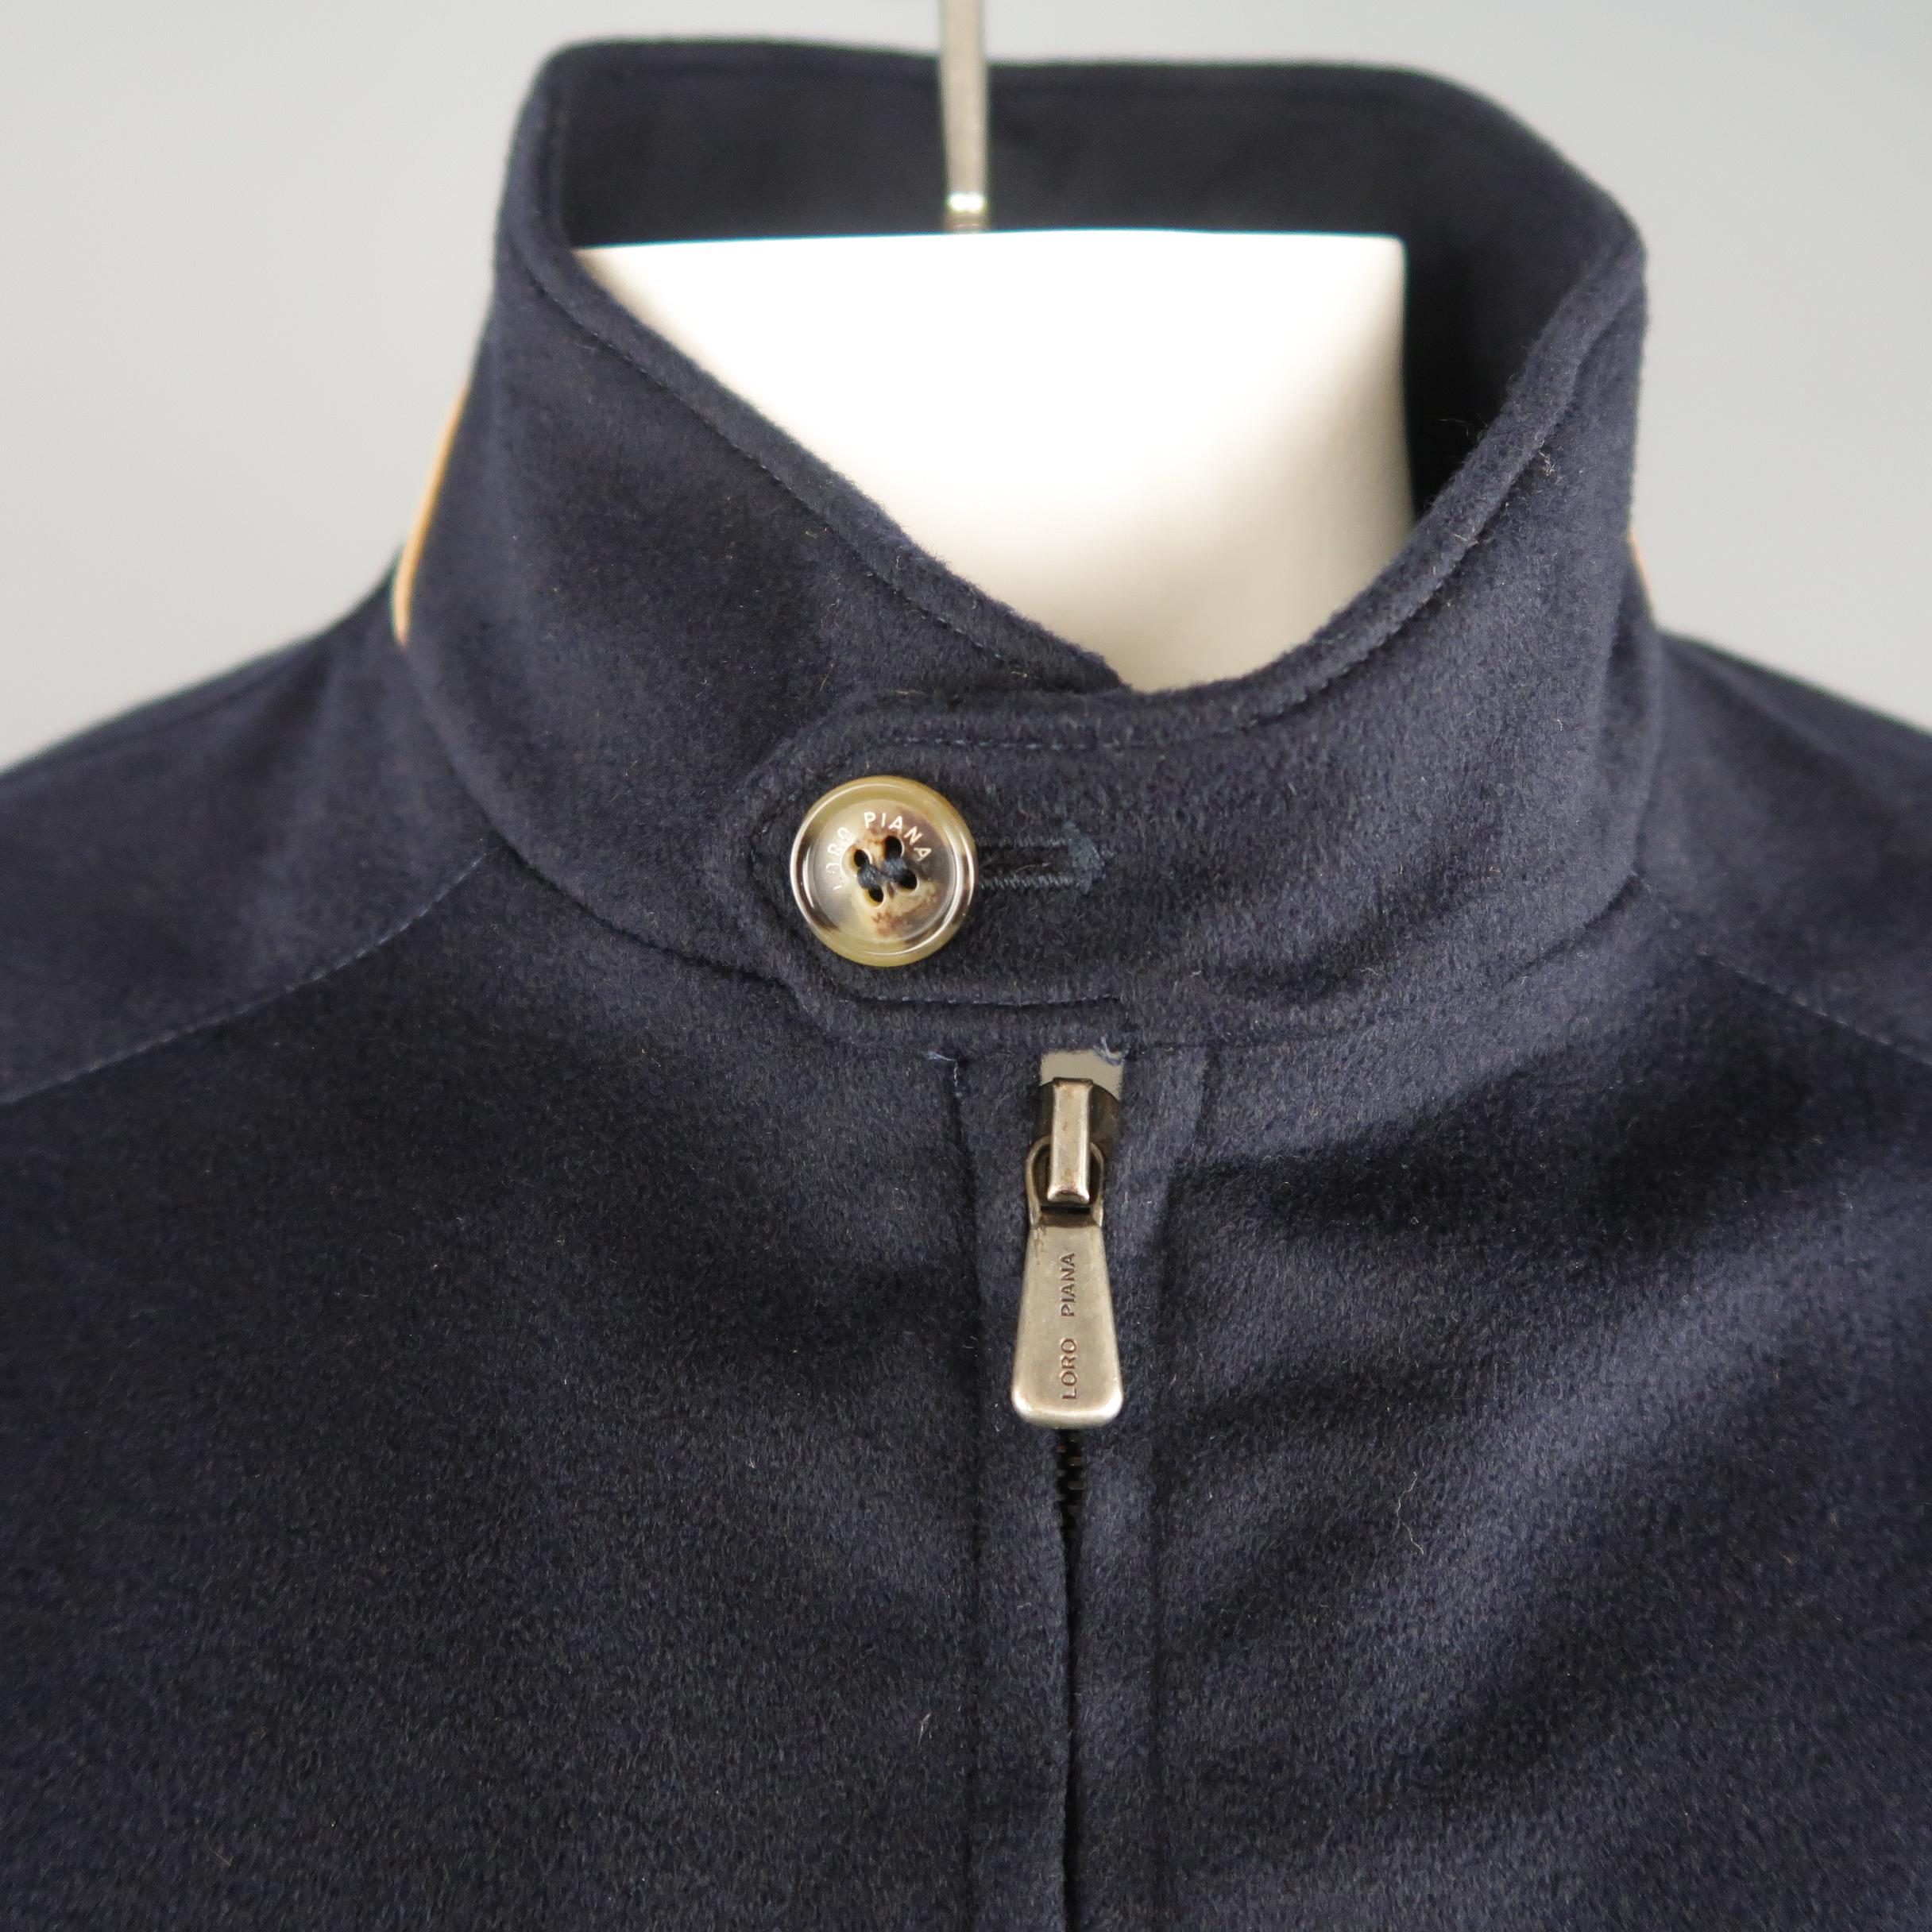 LORO PIANA Storm System jacket comes in navy cashmere with a high button collar, double zip front, slanted zip pockets, and tan suede trim. Made In Italy. Retail price $ 2,695.00
 
New without Tags.
Marked: XL
 
Measurements:
 
Shoulder: 20